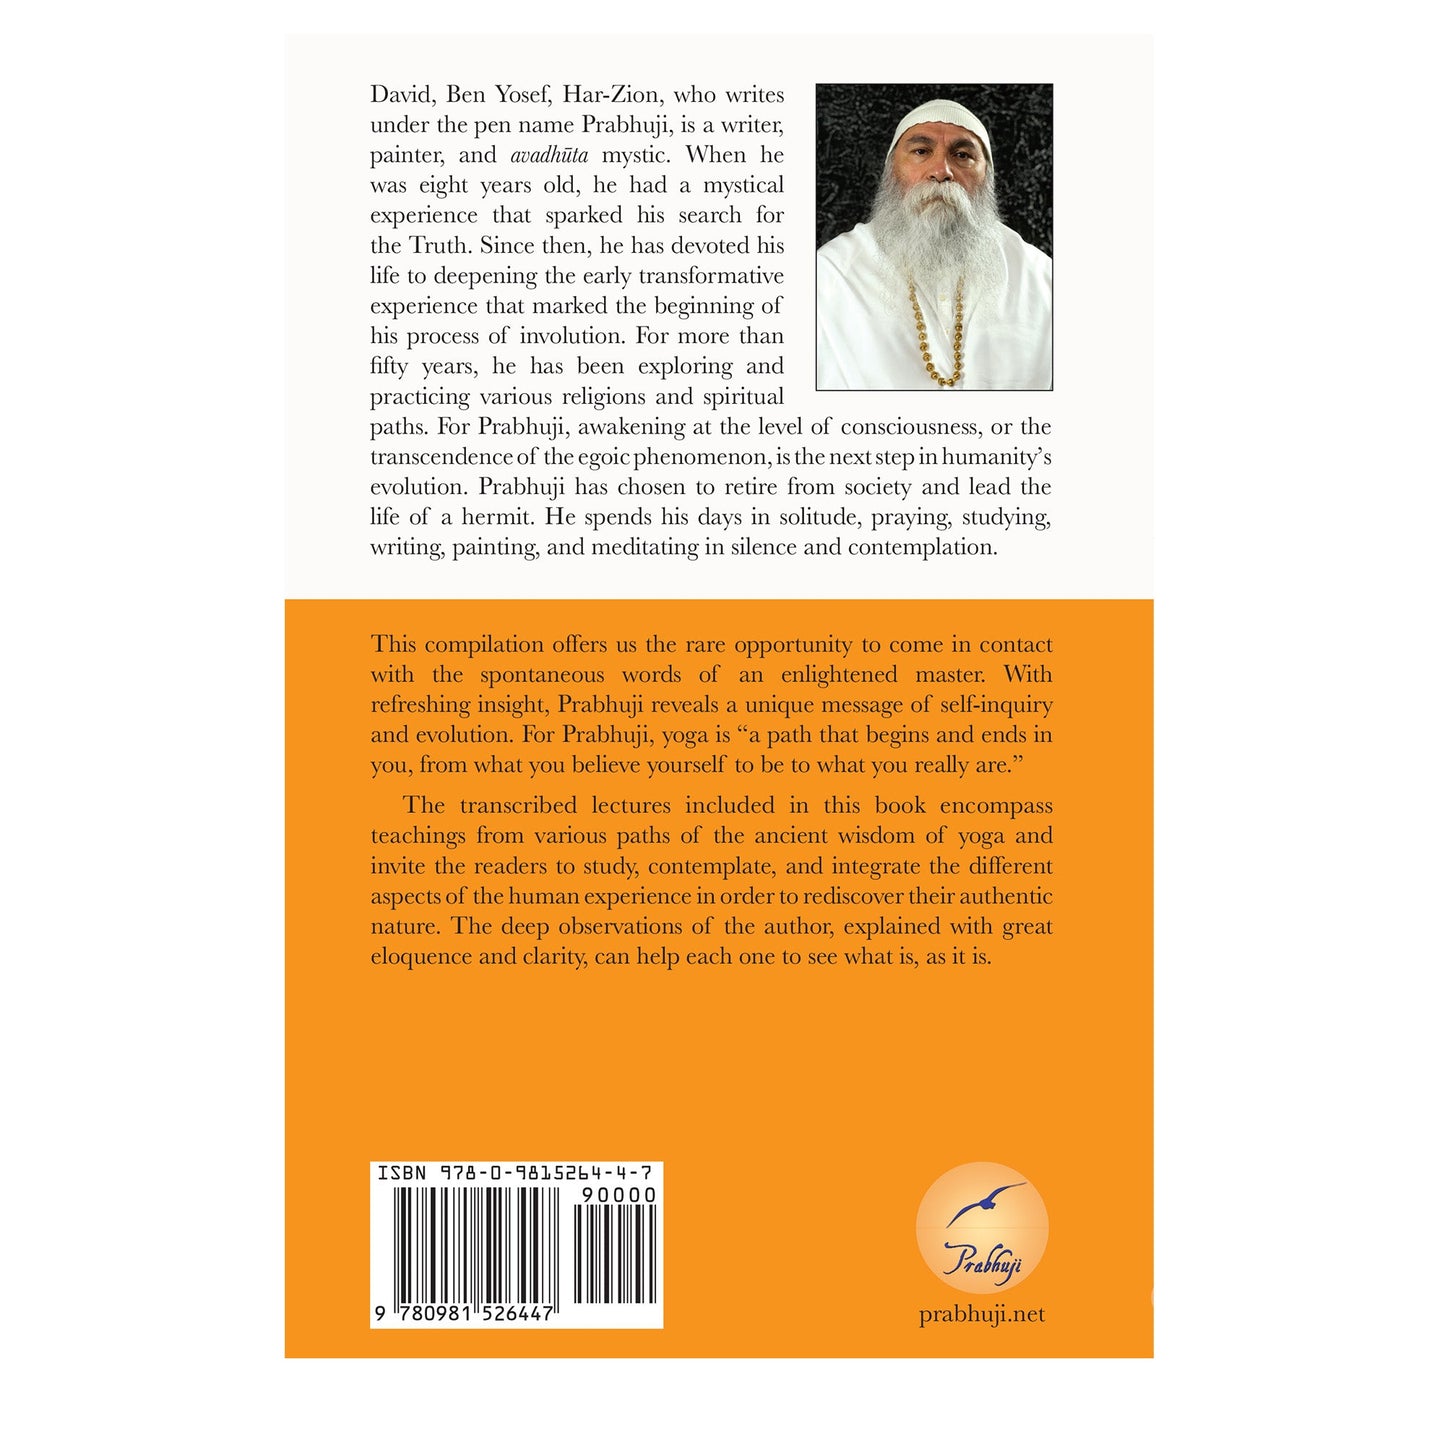 Book What is, as it is - Satsangs with Prabhuji (Paperback - English) 